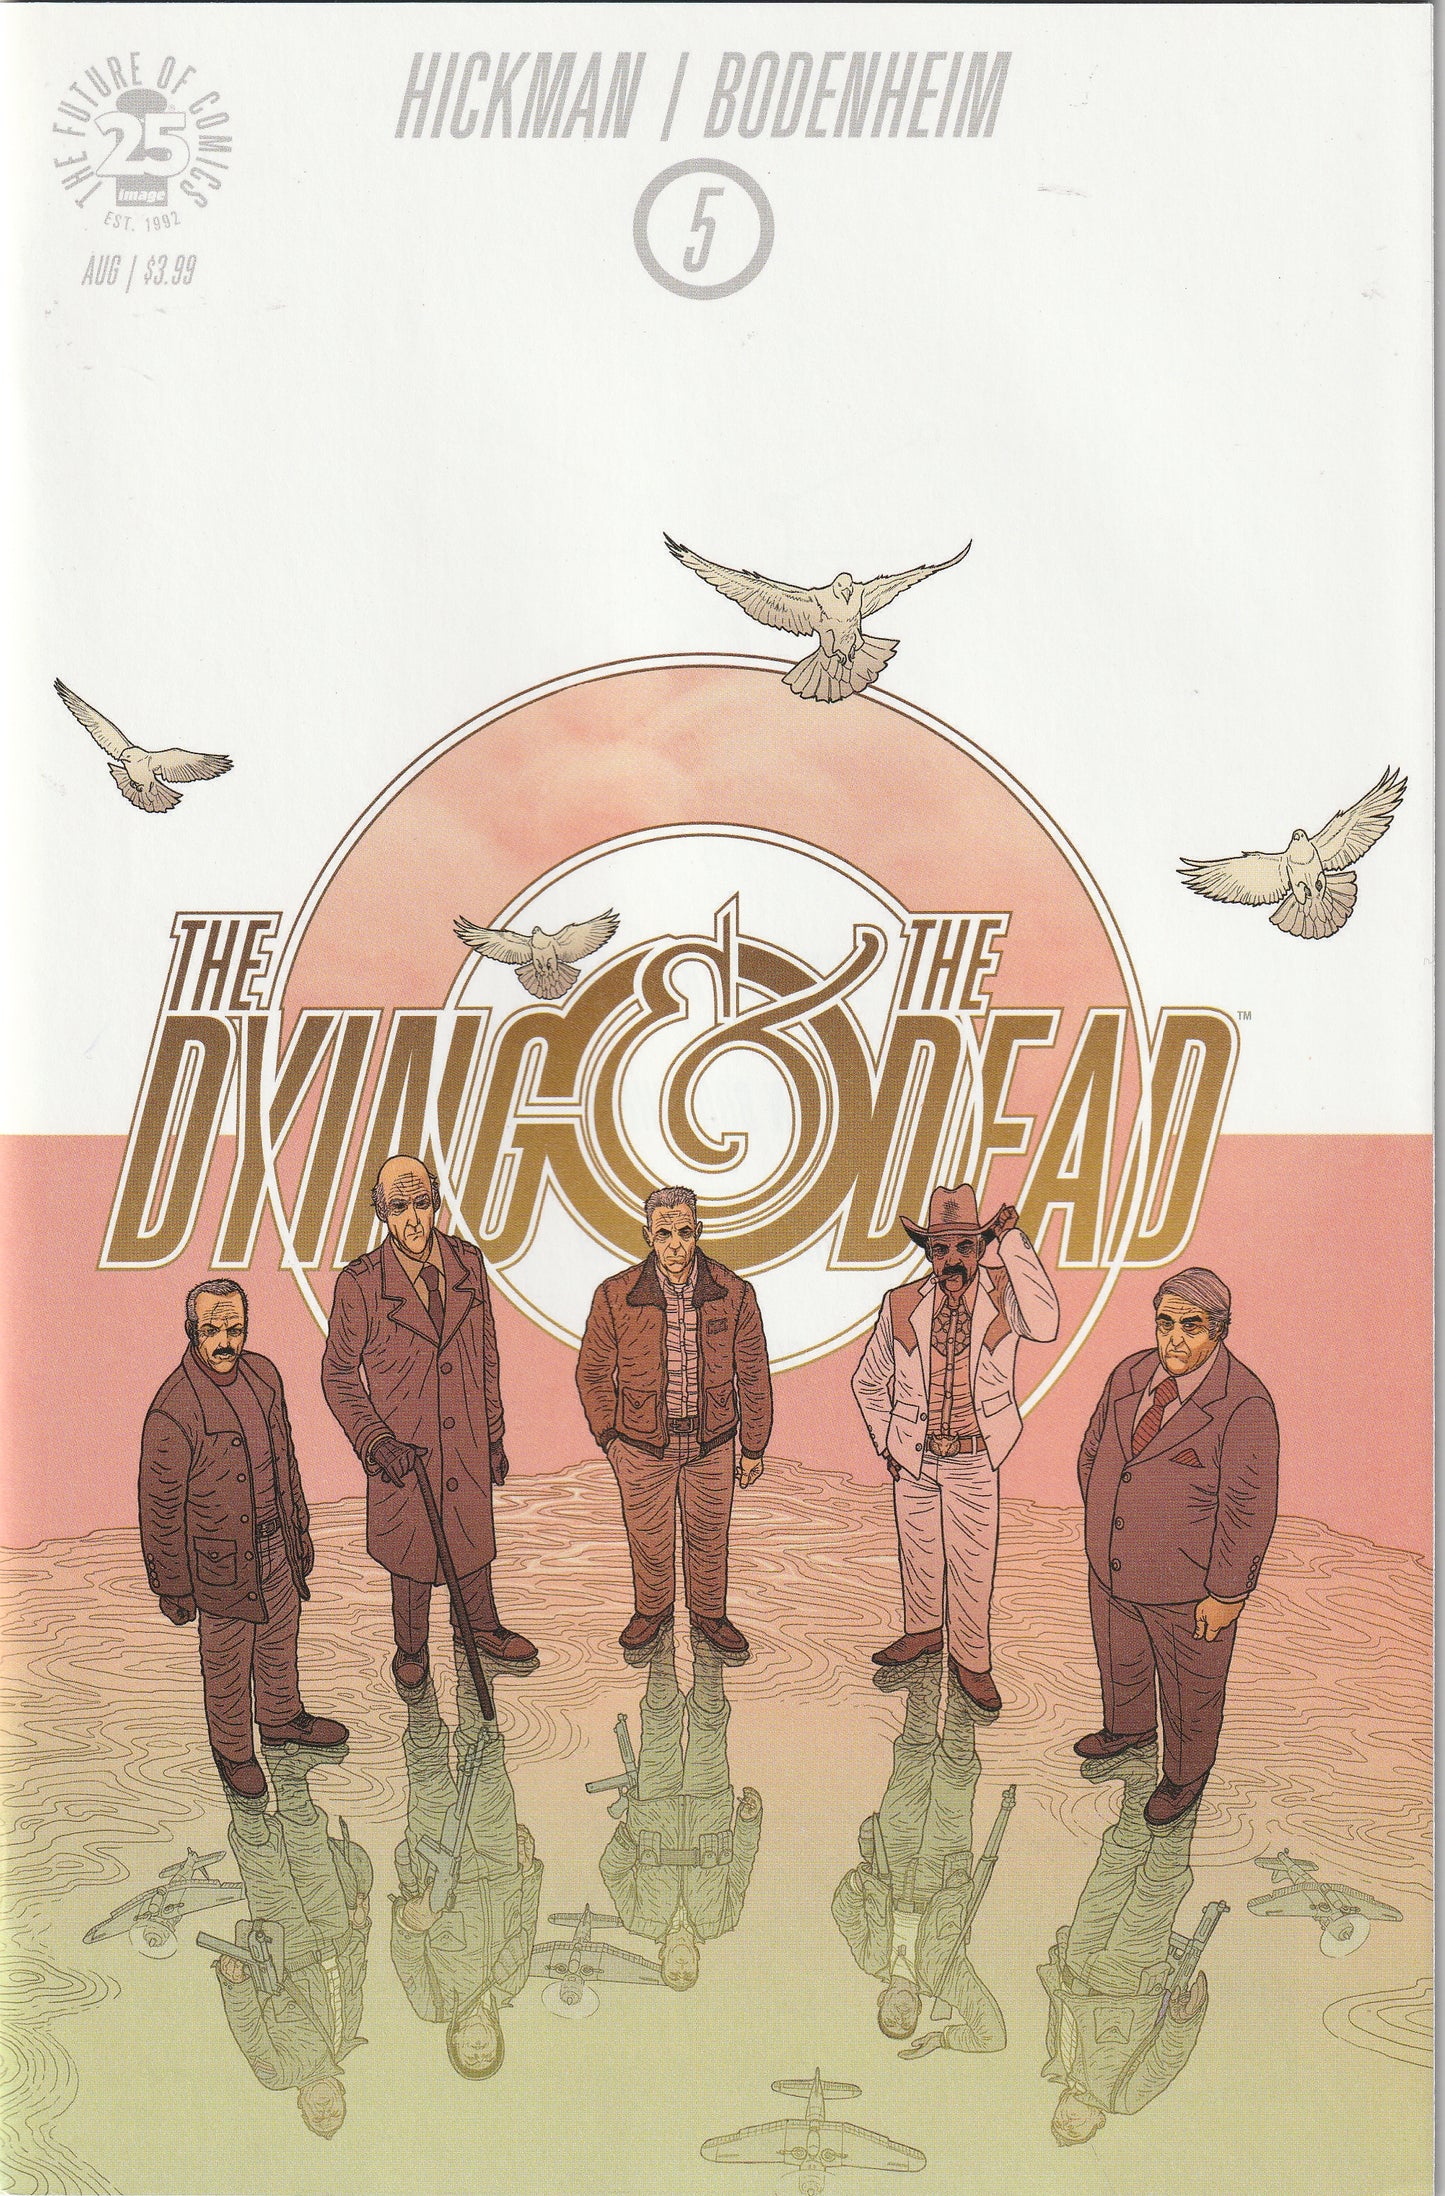 The Dying & The Dead #5 (2017) - Jonathan Hickman